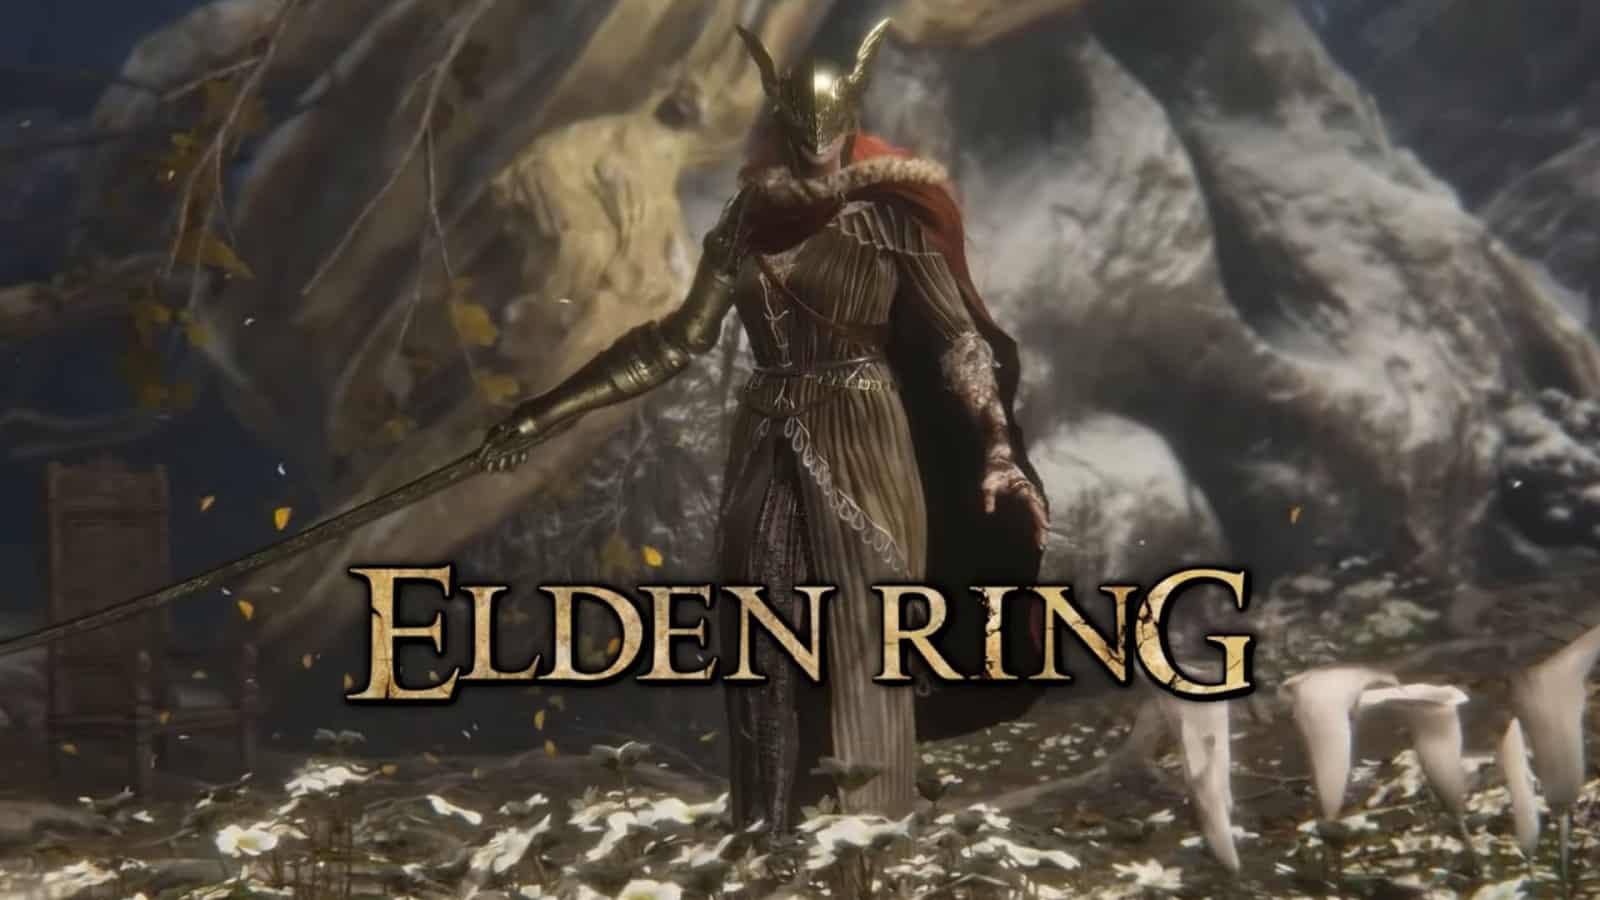 Elden Ring still more watched than Warzone on Twitch months after